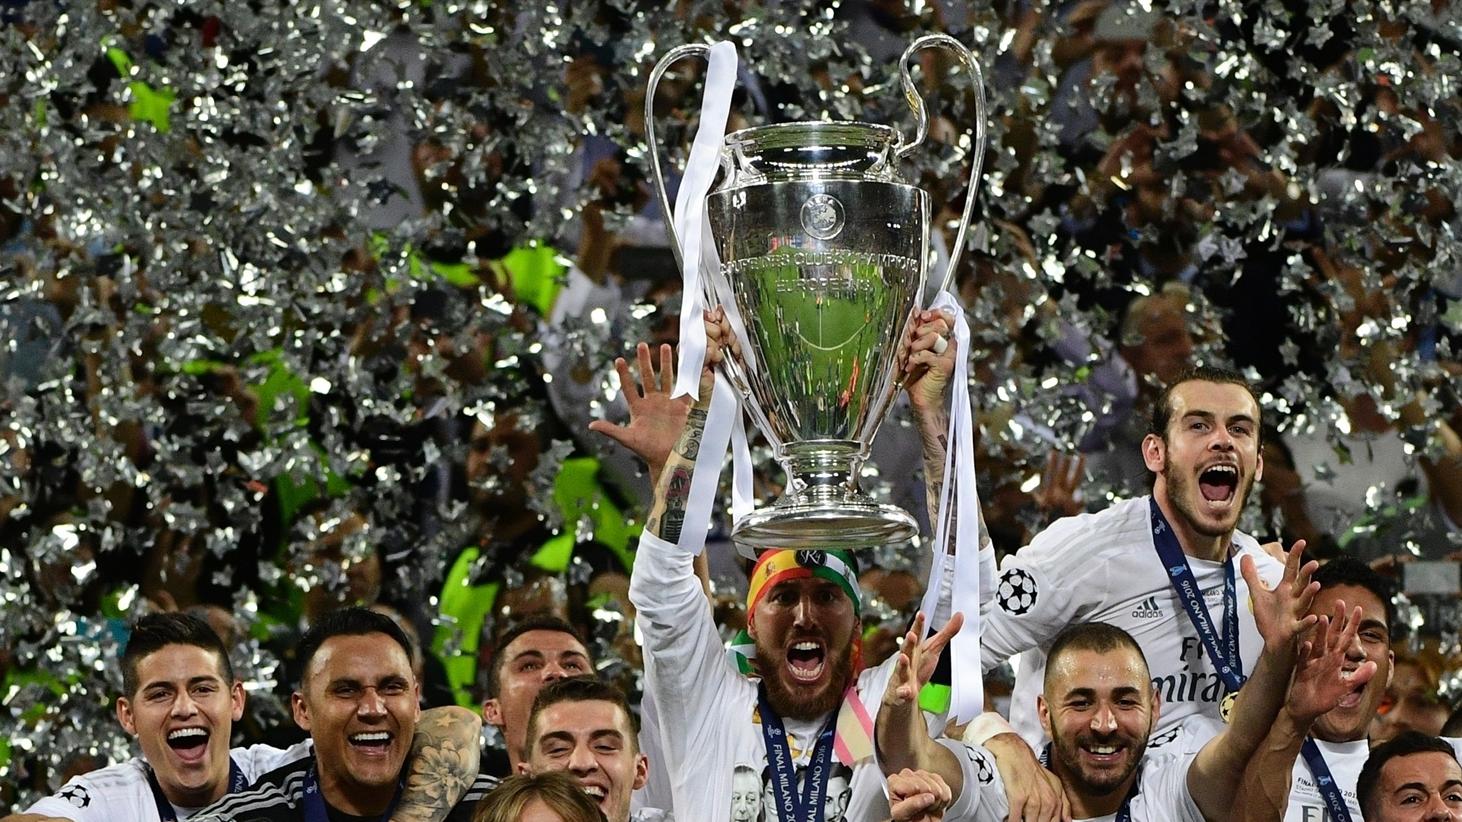 real madrid champions league 2016